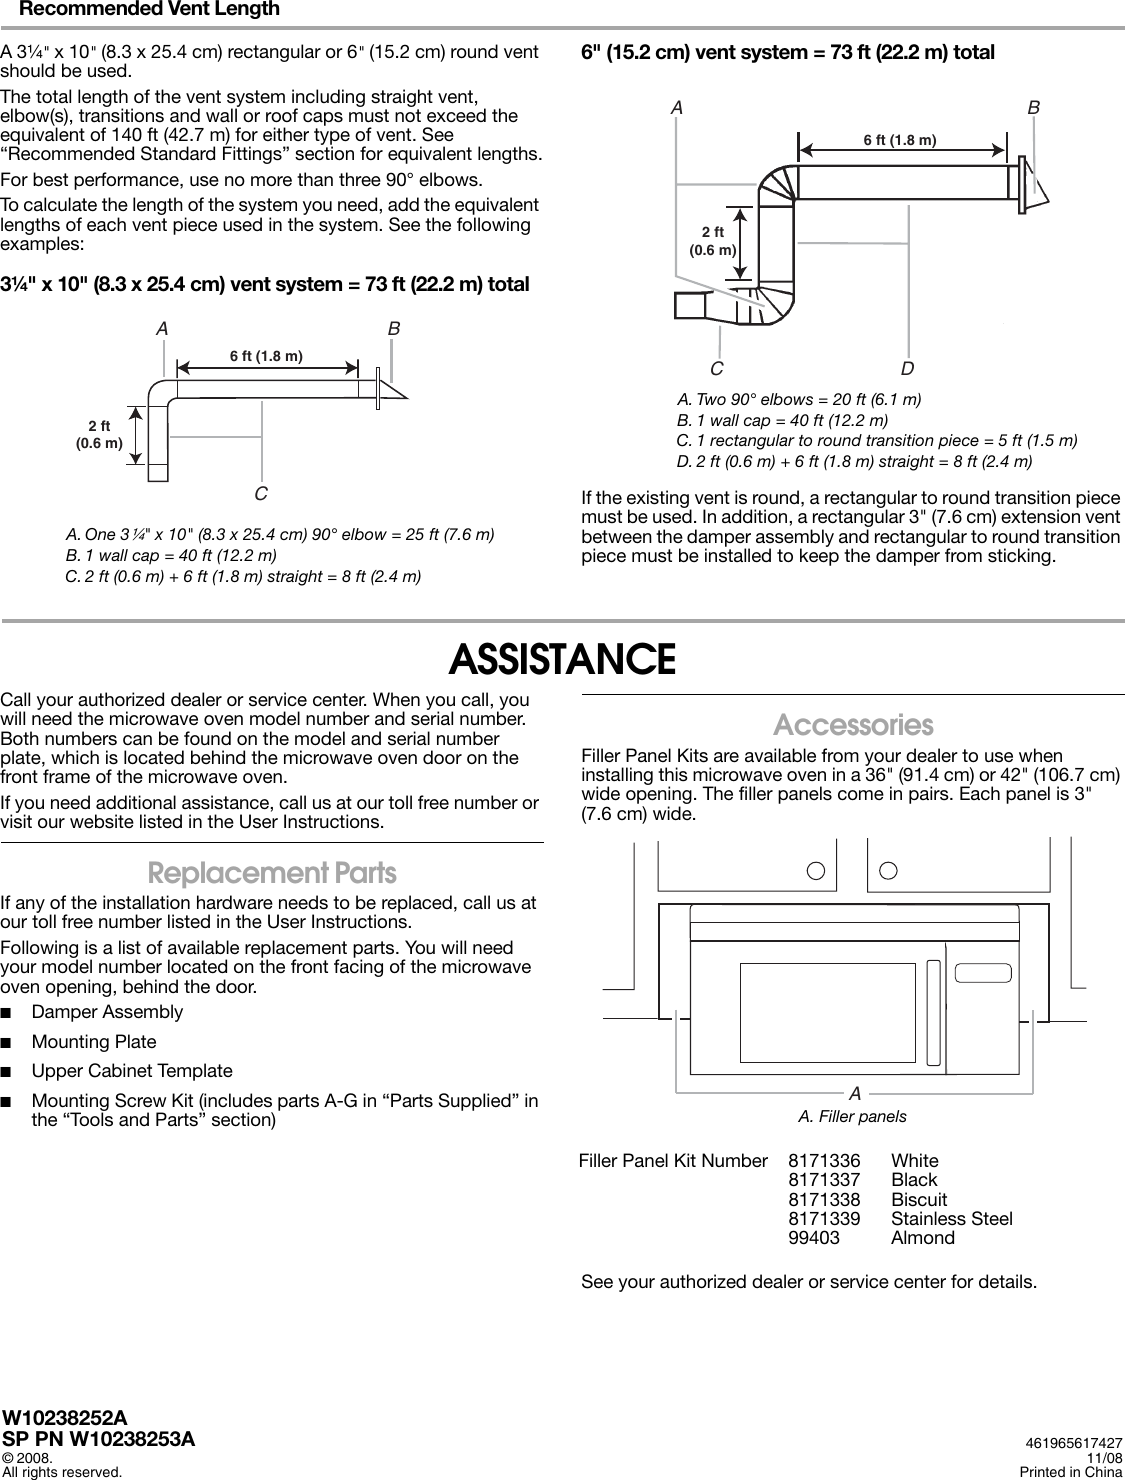 Page 12 of 12 - Whirlpool Whirlpool-W10238252A-Users-Manual- W10238252A  Whirlpool-w10238252a-users-manual